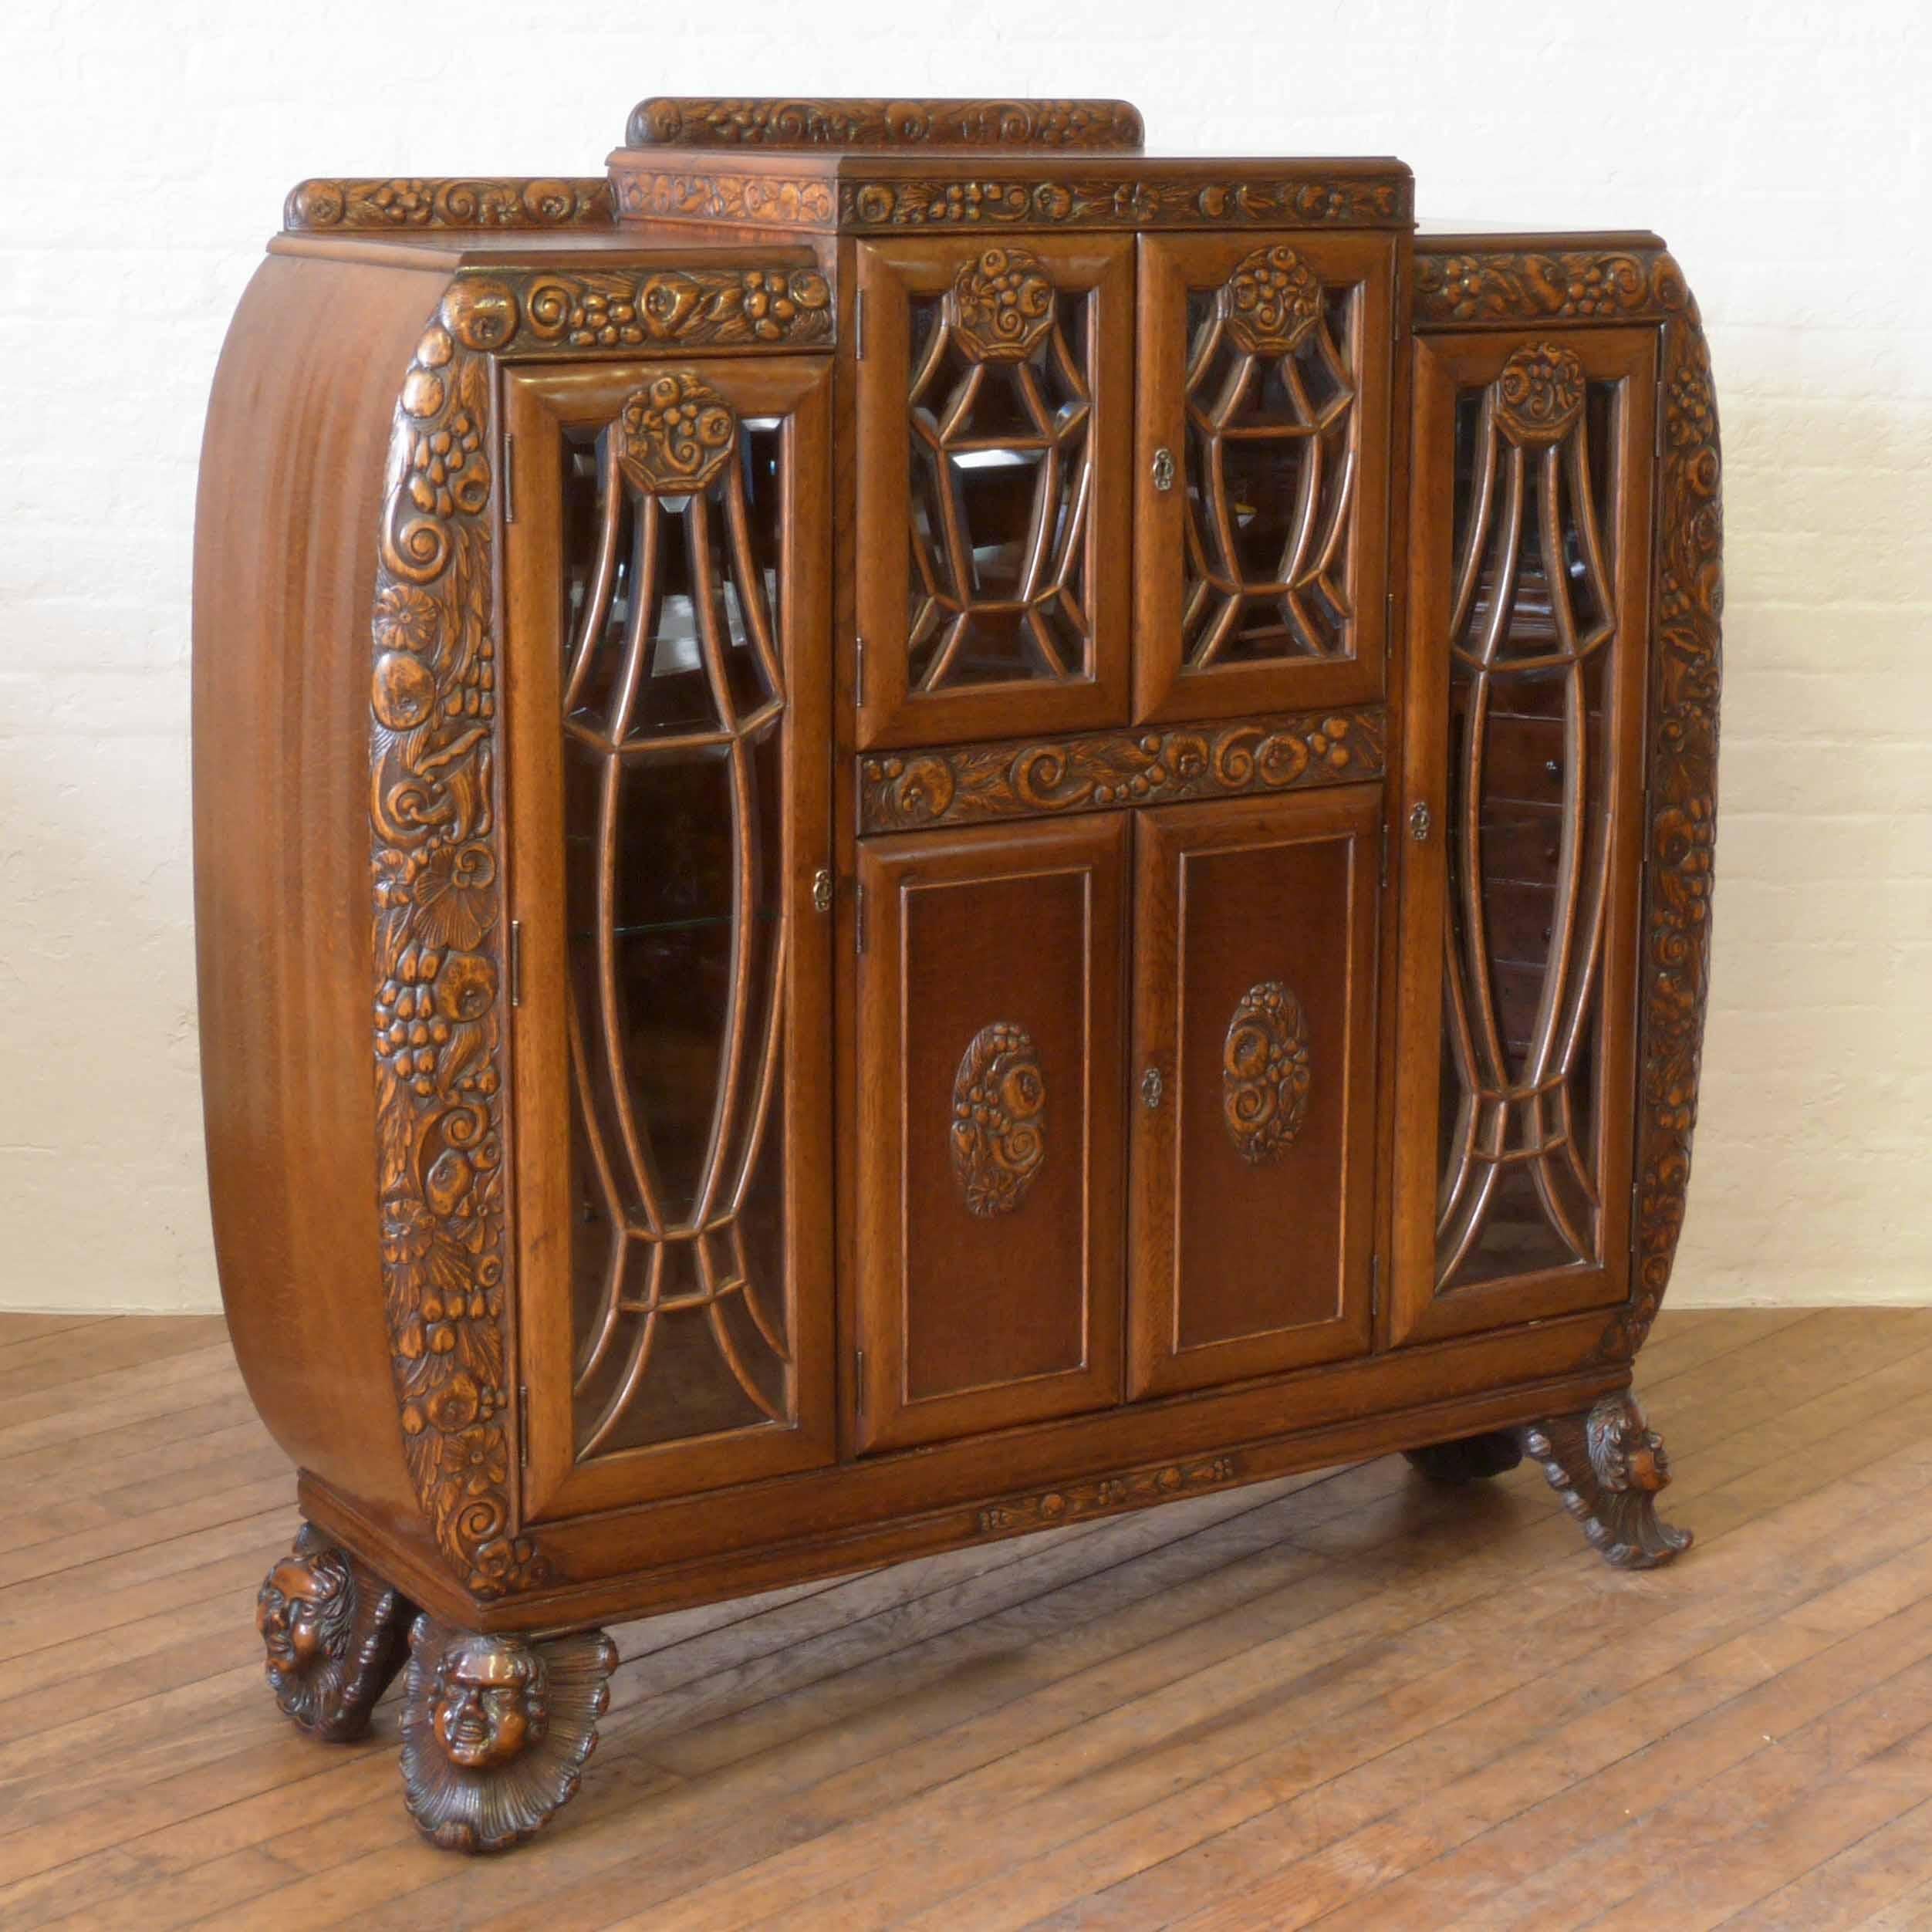 This is an exceptionally rare oak Art Deco cabinet with an extravaganza of decoration. From the foliate fruiting carved throughout to the precision bevelled glass all individually cut to each Art Deco inspired astragal door. The typical bowed sides